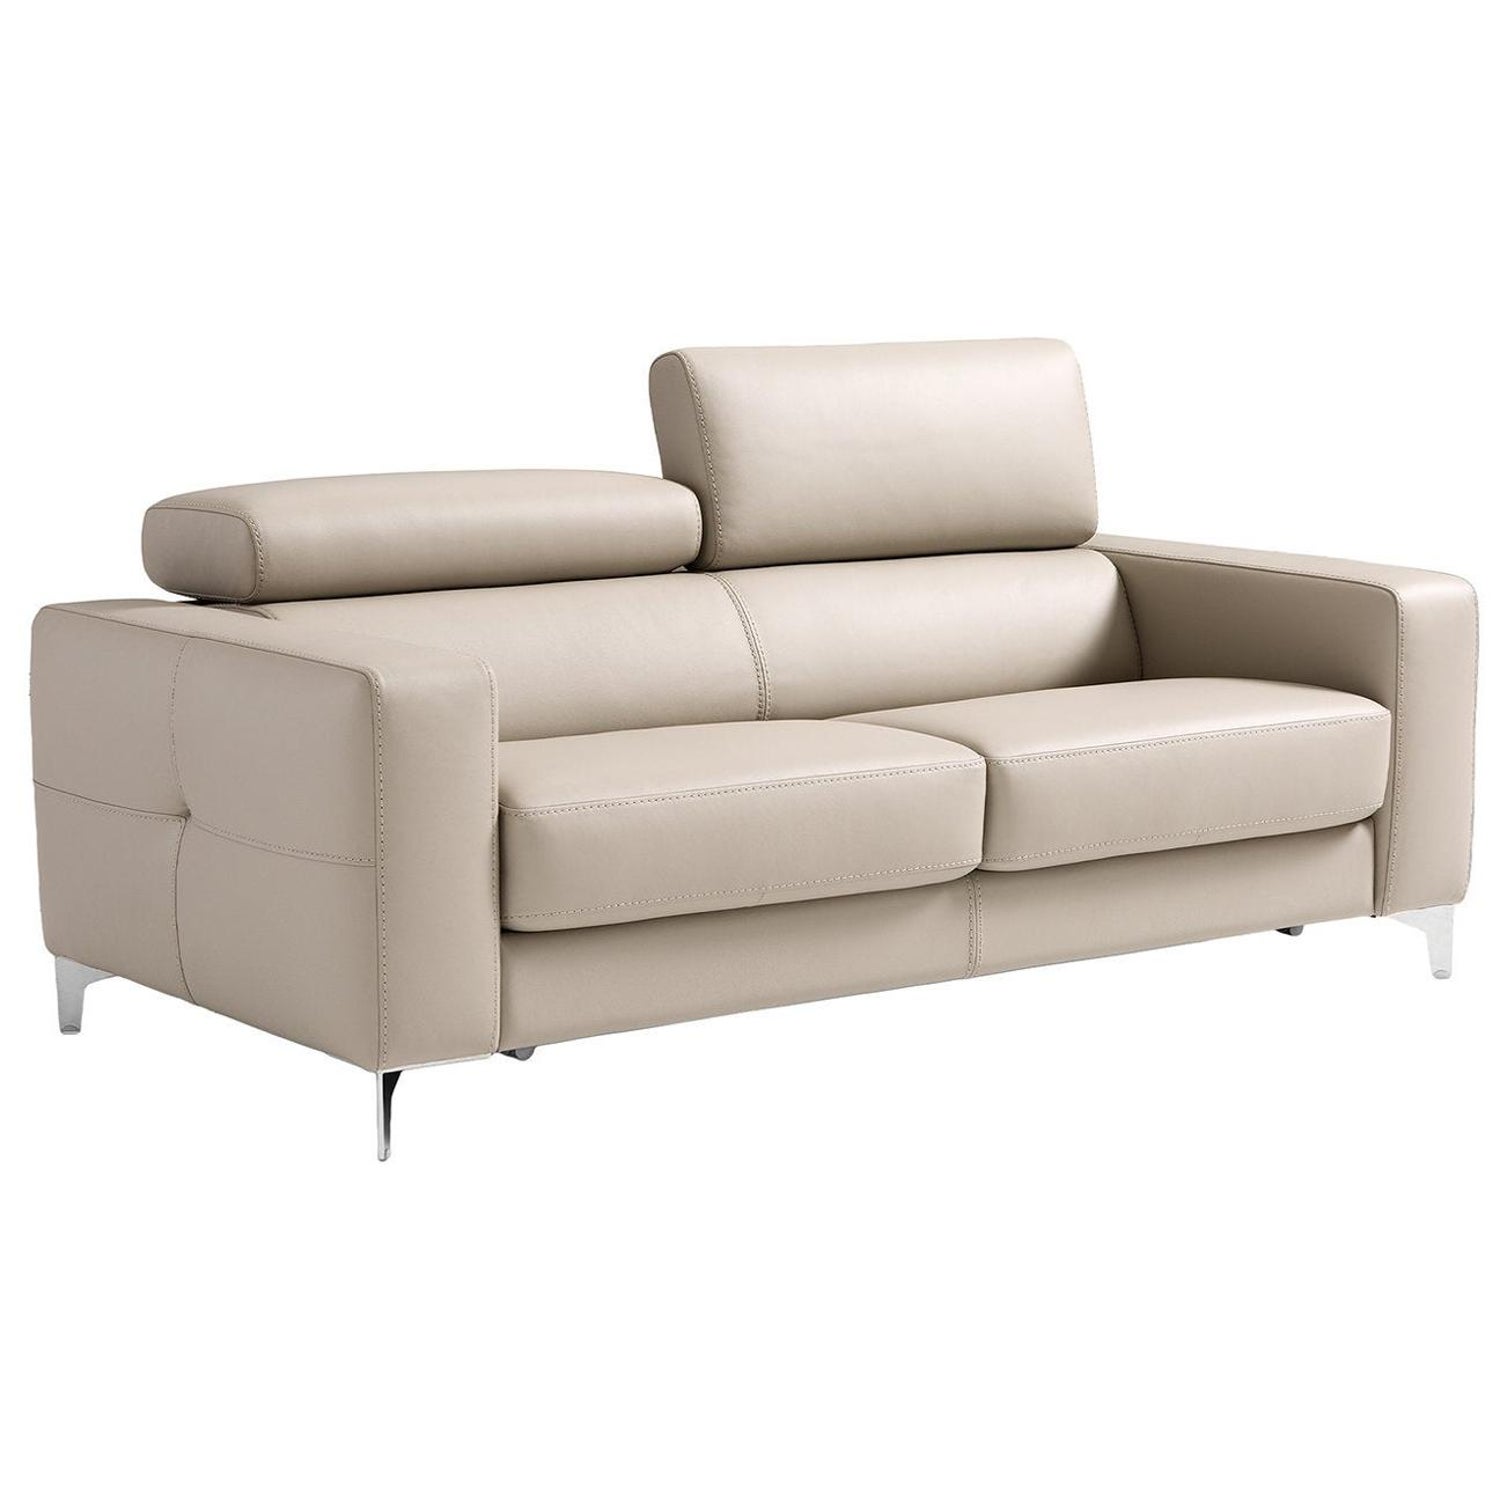 Verona Beige Leather 2-Seater Sofa Bed For Sale at 1stDibs